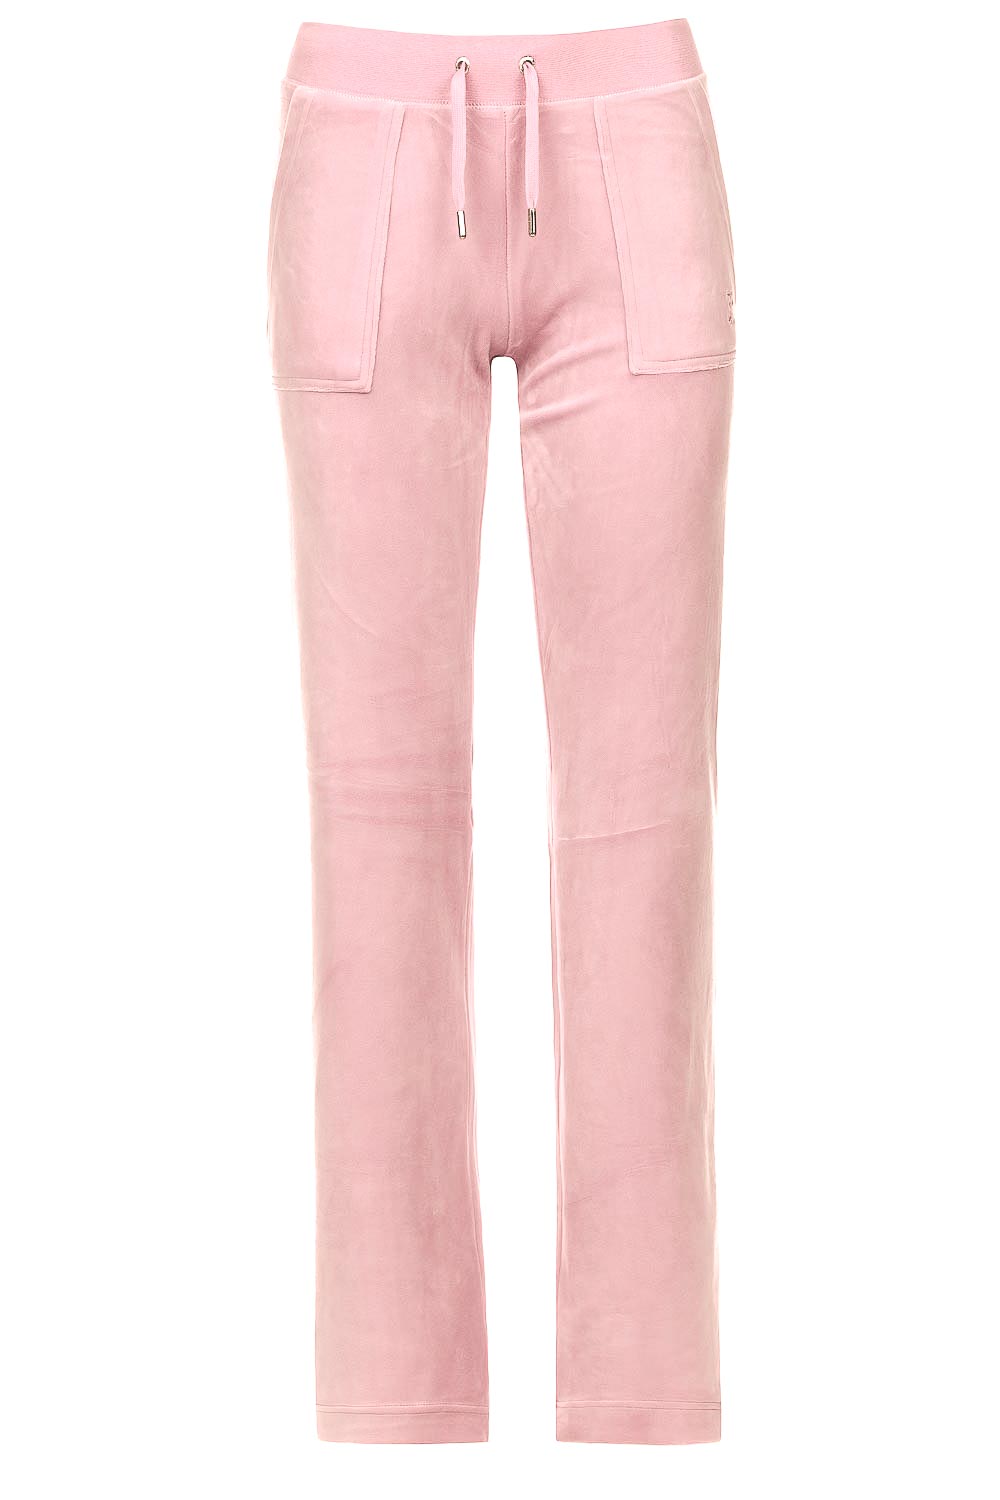 Buy Juicy Couture Pants Online In India  Etsy India